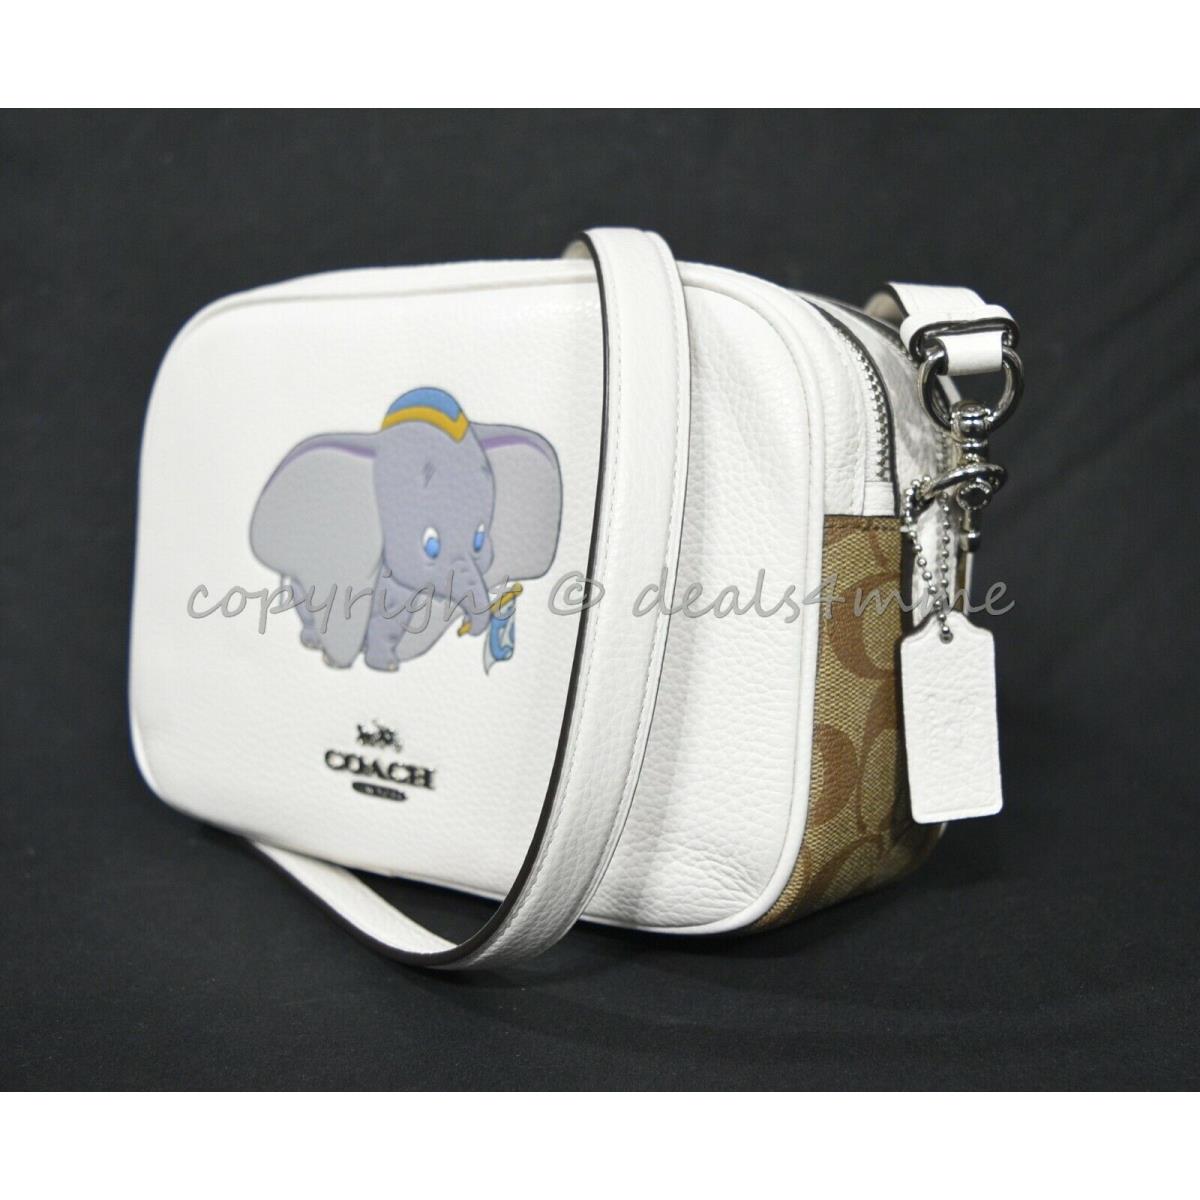 91118 Disney X Coach Jes Crossbody in Signature Canvas With Dumbo for sale  online